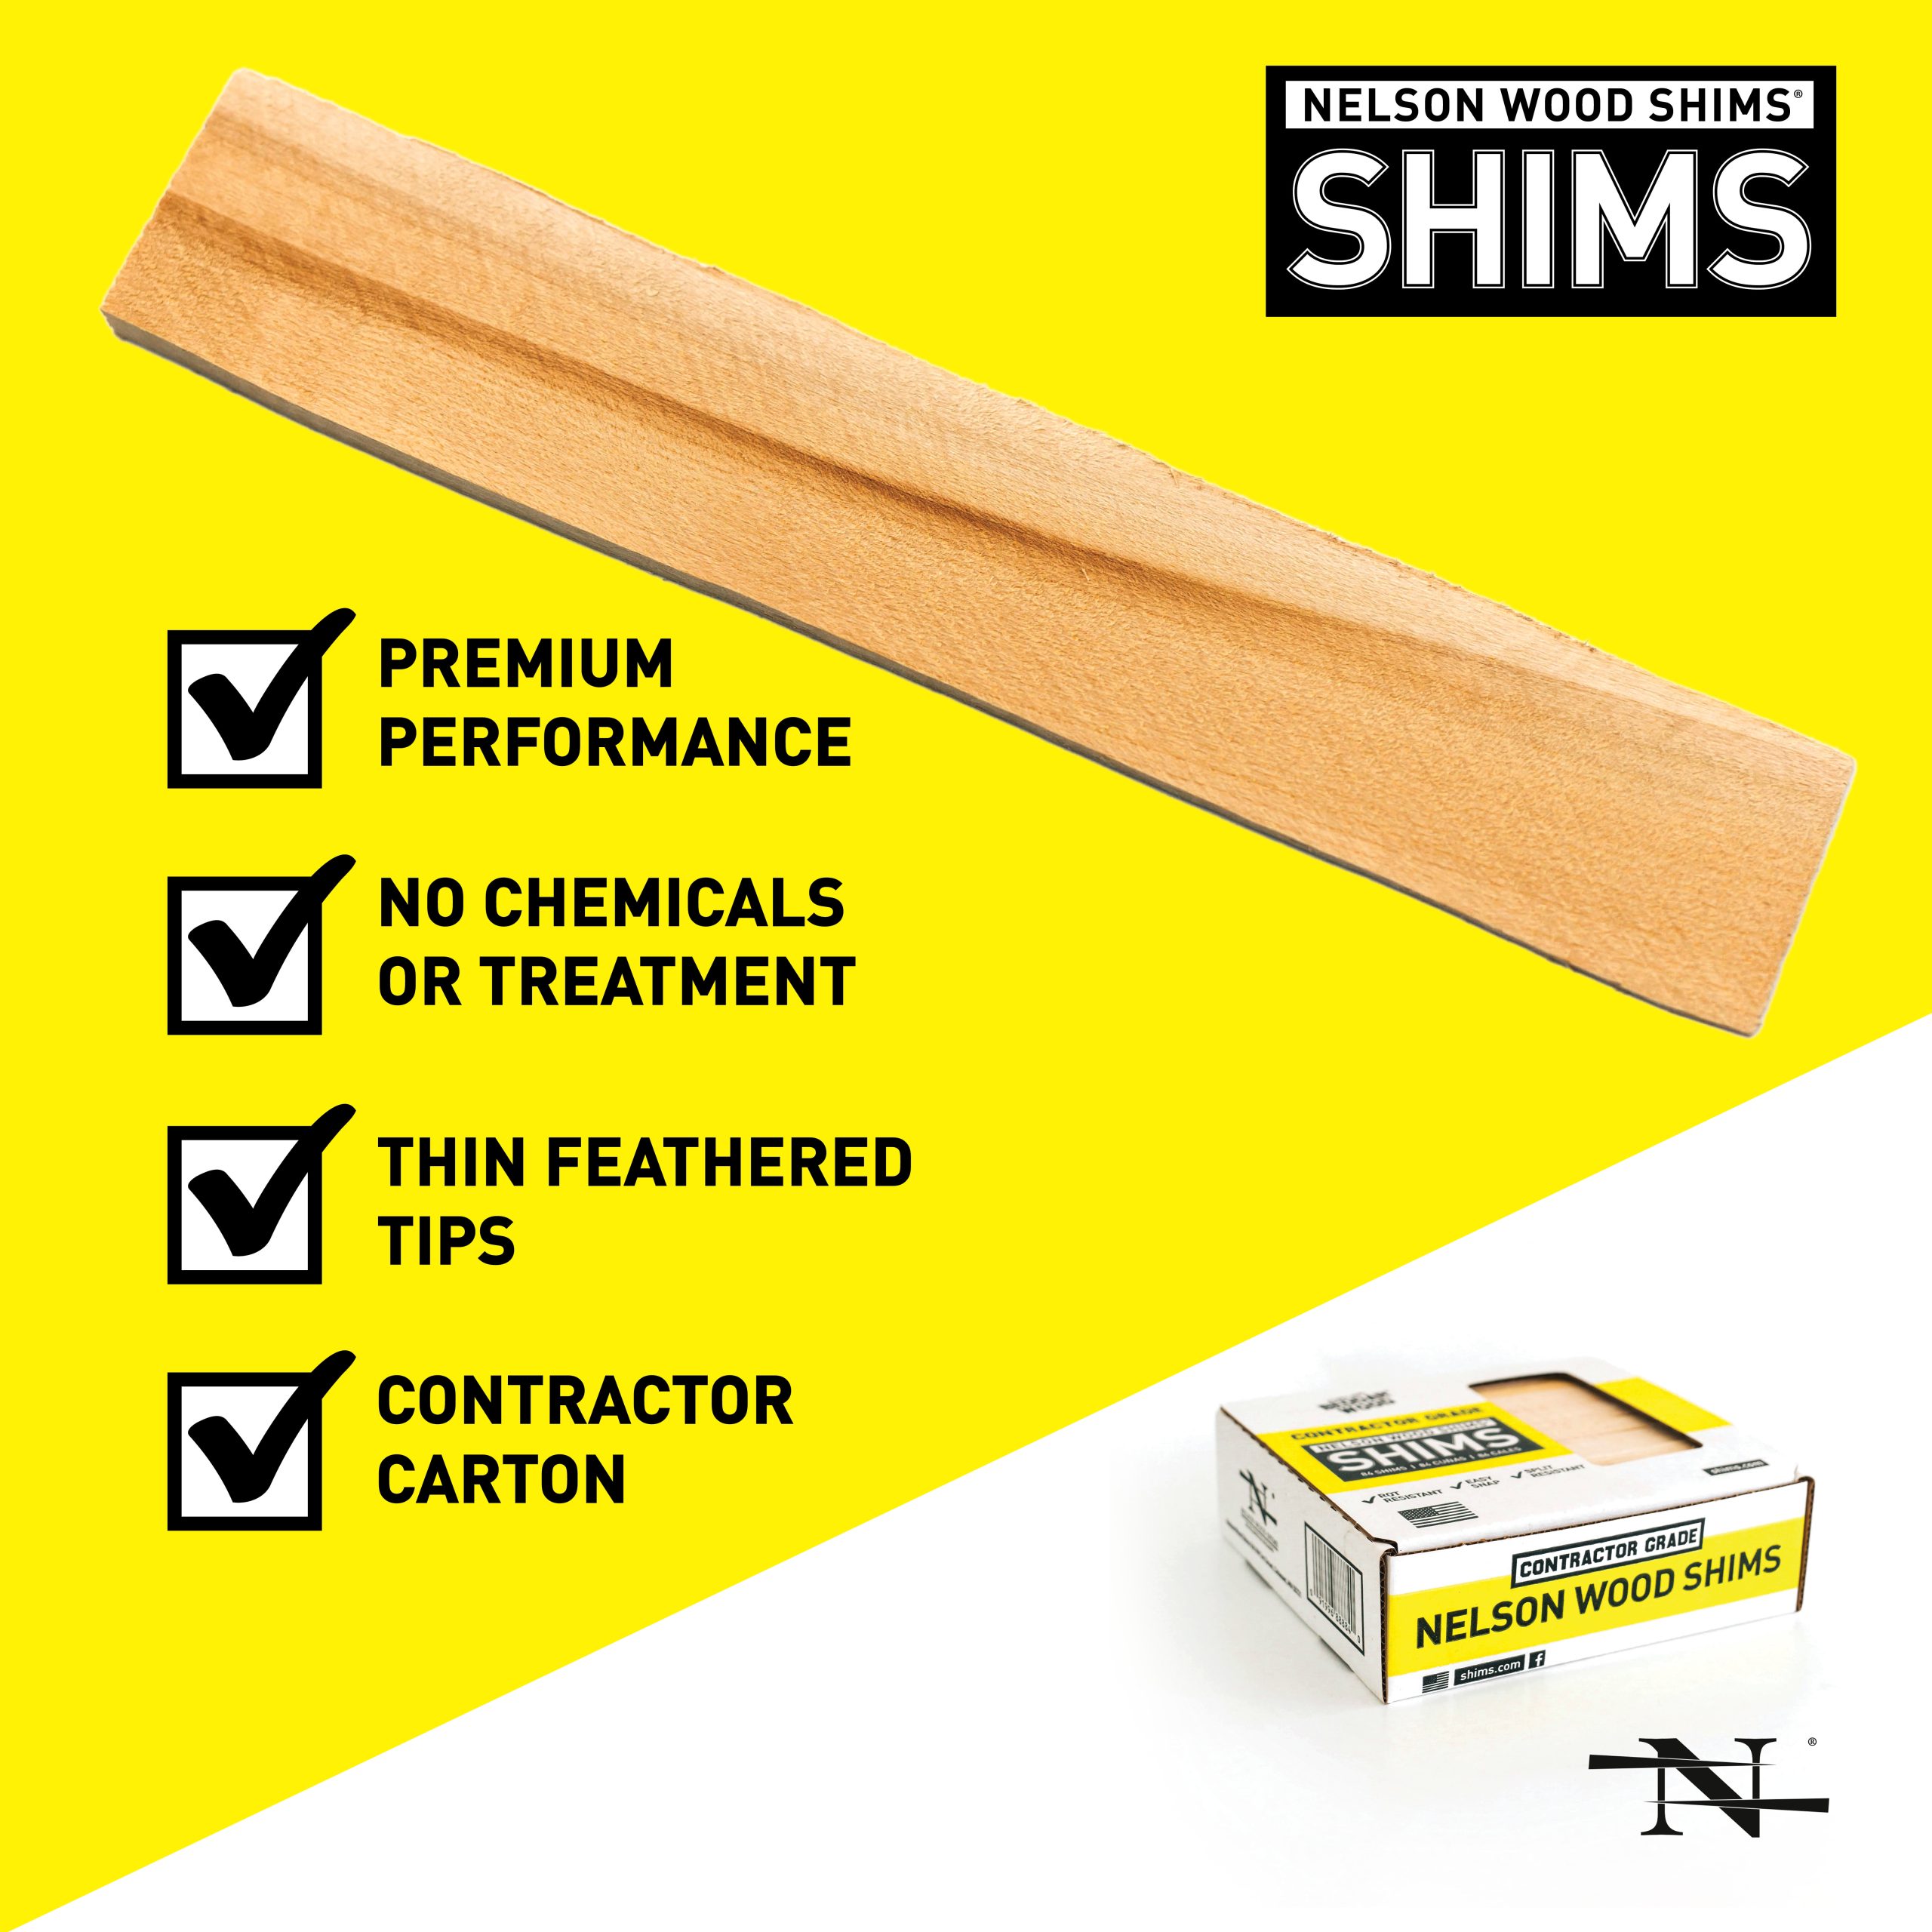 Nelson Wood Shims – Leveling Wedge Professional Contractor DIY Bulk Kit (42  Ct), Premium Beddar Wood for Performance, 100% Kiln Dried, Indoor/Outdoor